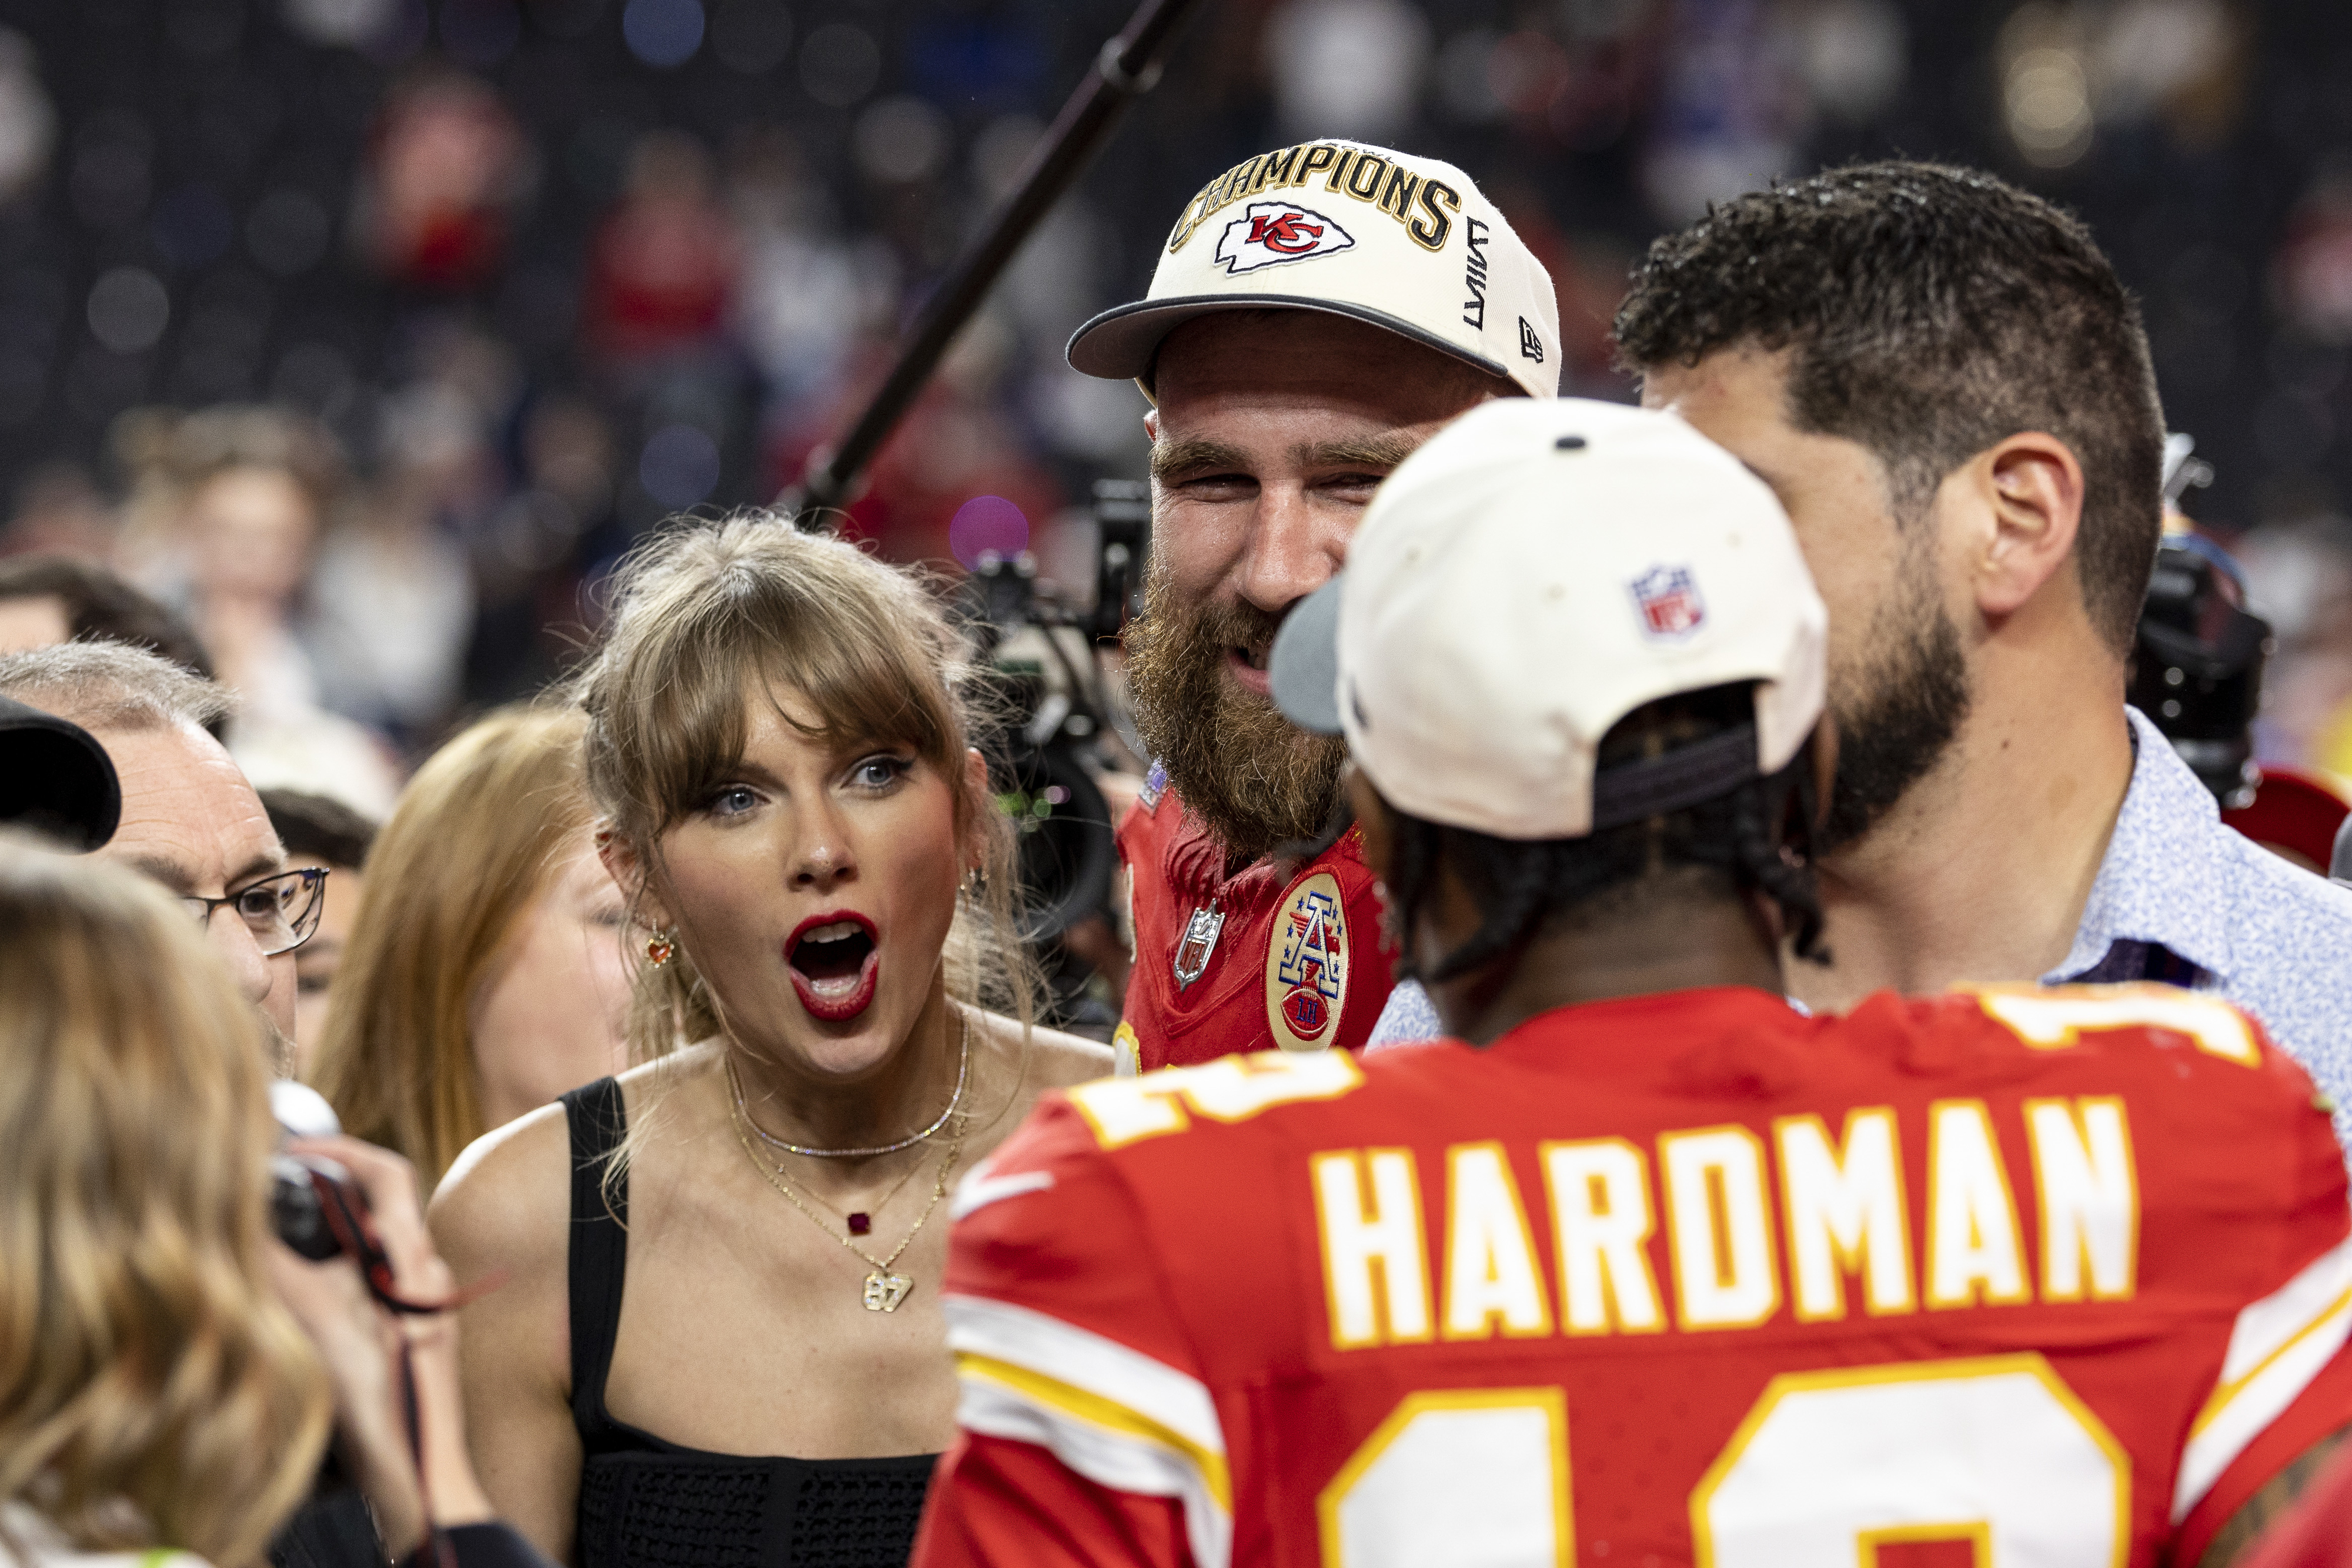 Closeup of Taylor and Travis celebrating the Super Bowl win